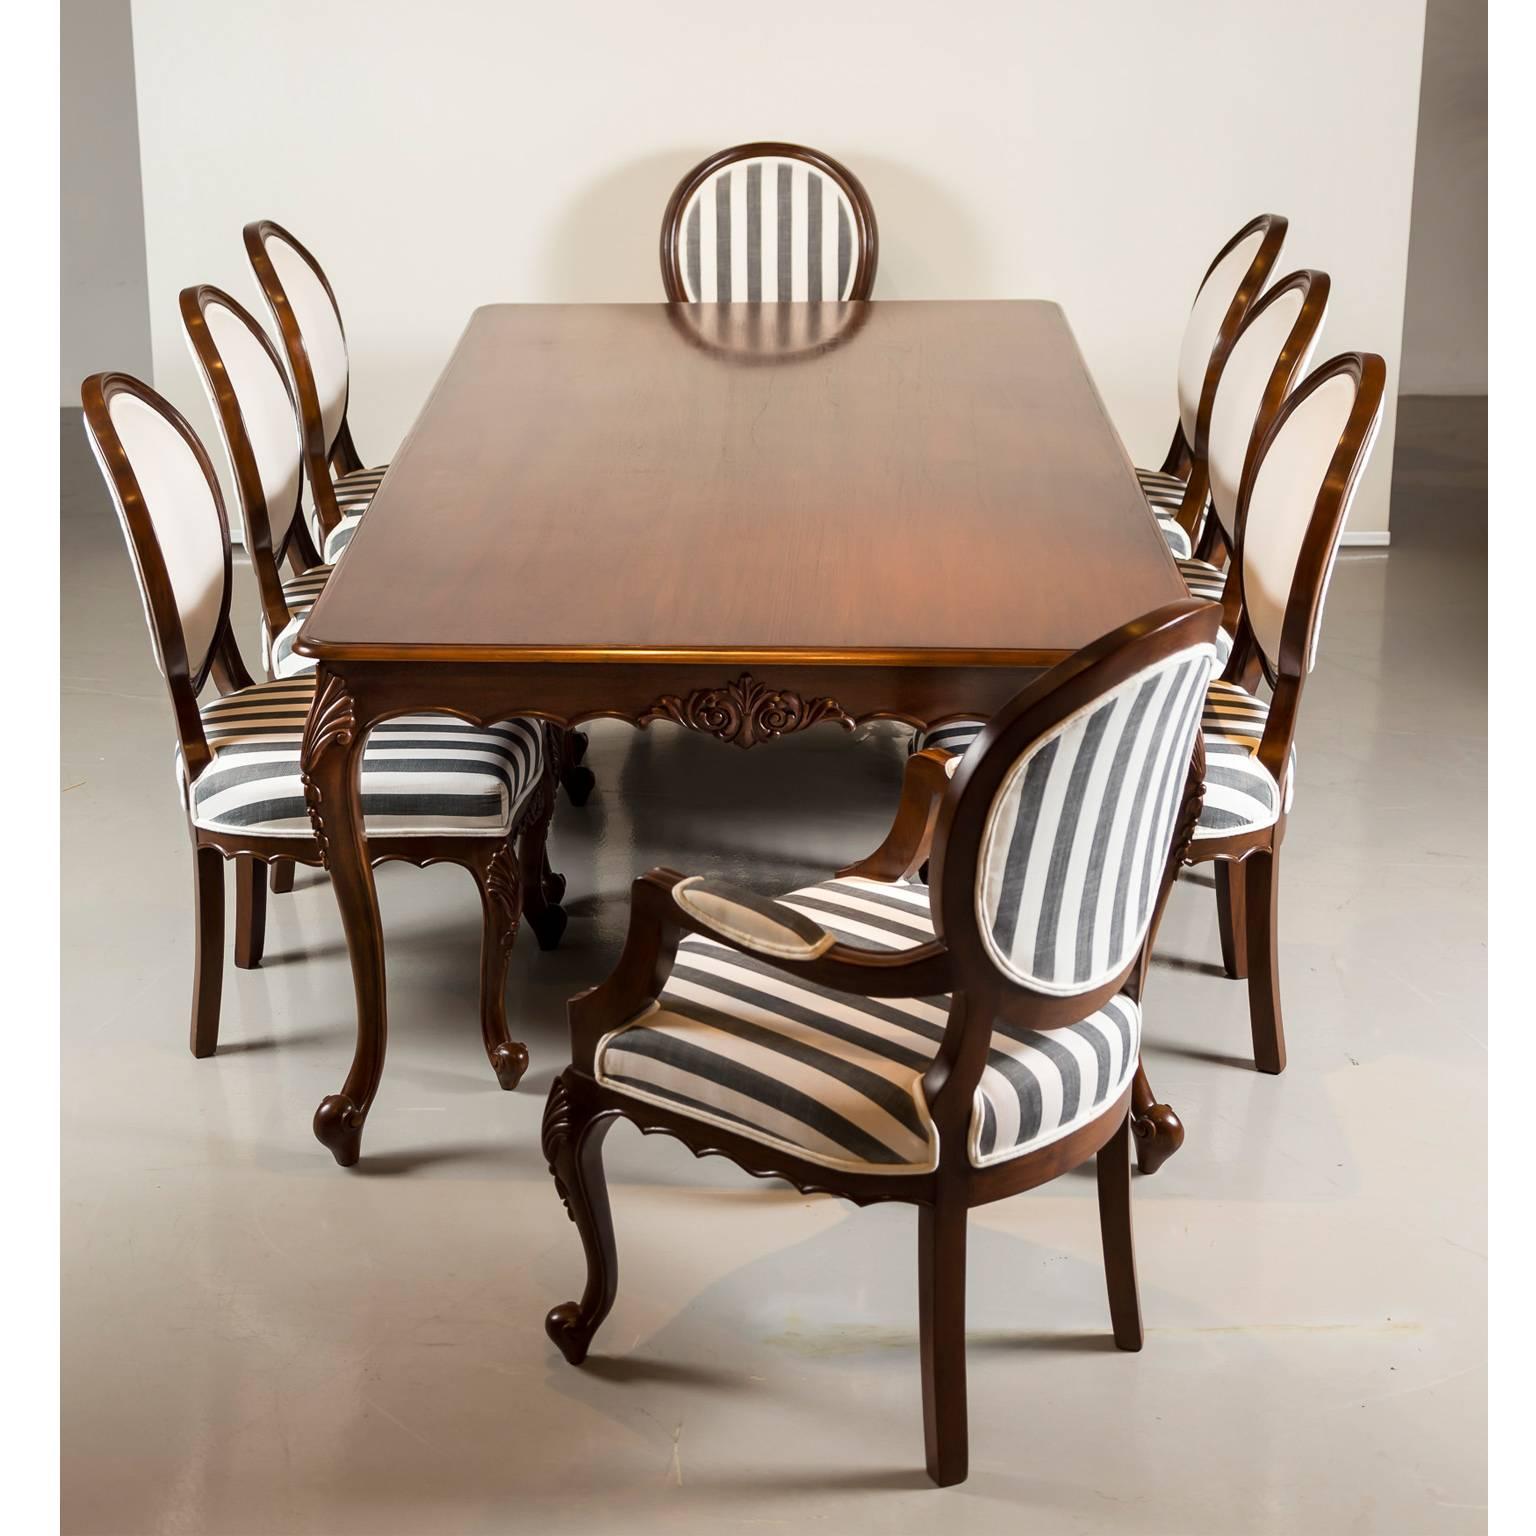 A good size British colonial dining table and a set of eight balloon back chairs made of teak wood. The top of the table, with a moulded edge, is beautifully figured with a carved and serpentine shaped apron. The cabriole legs, with acanthus carving